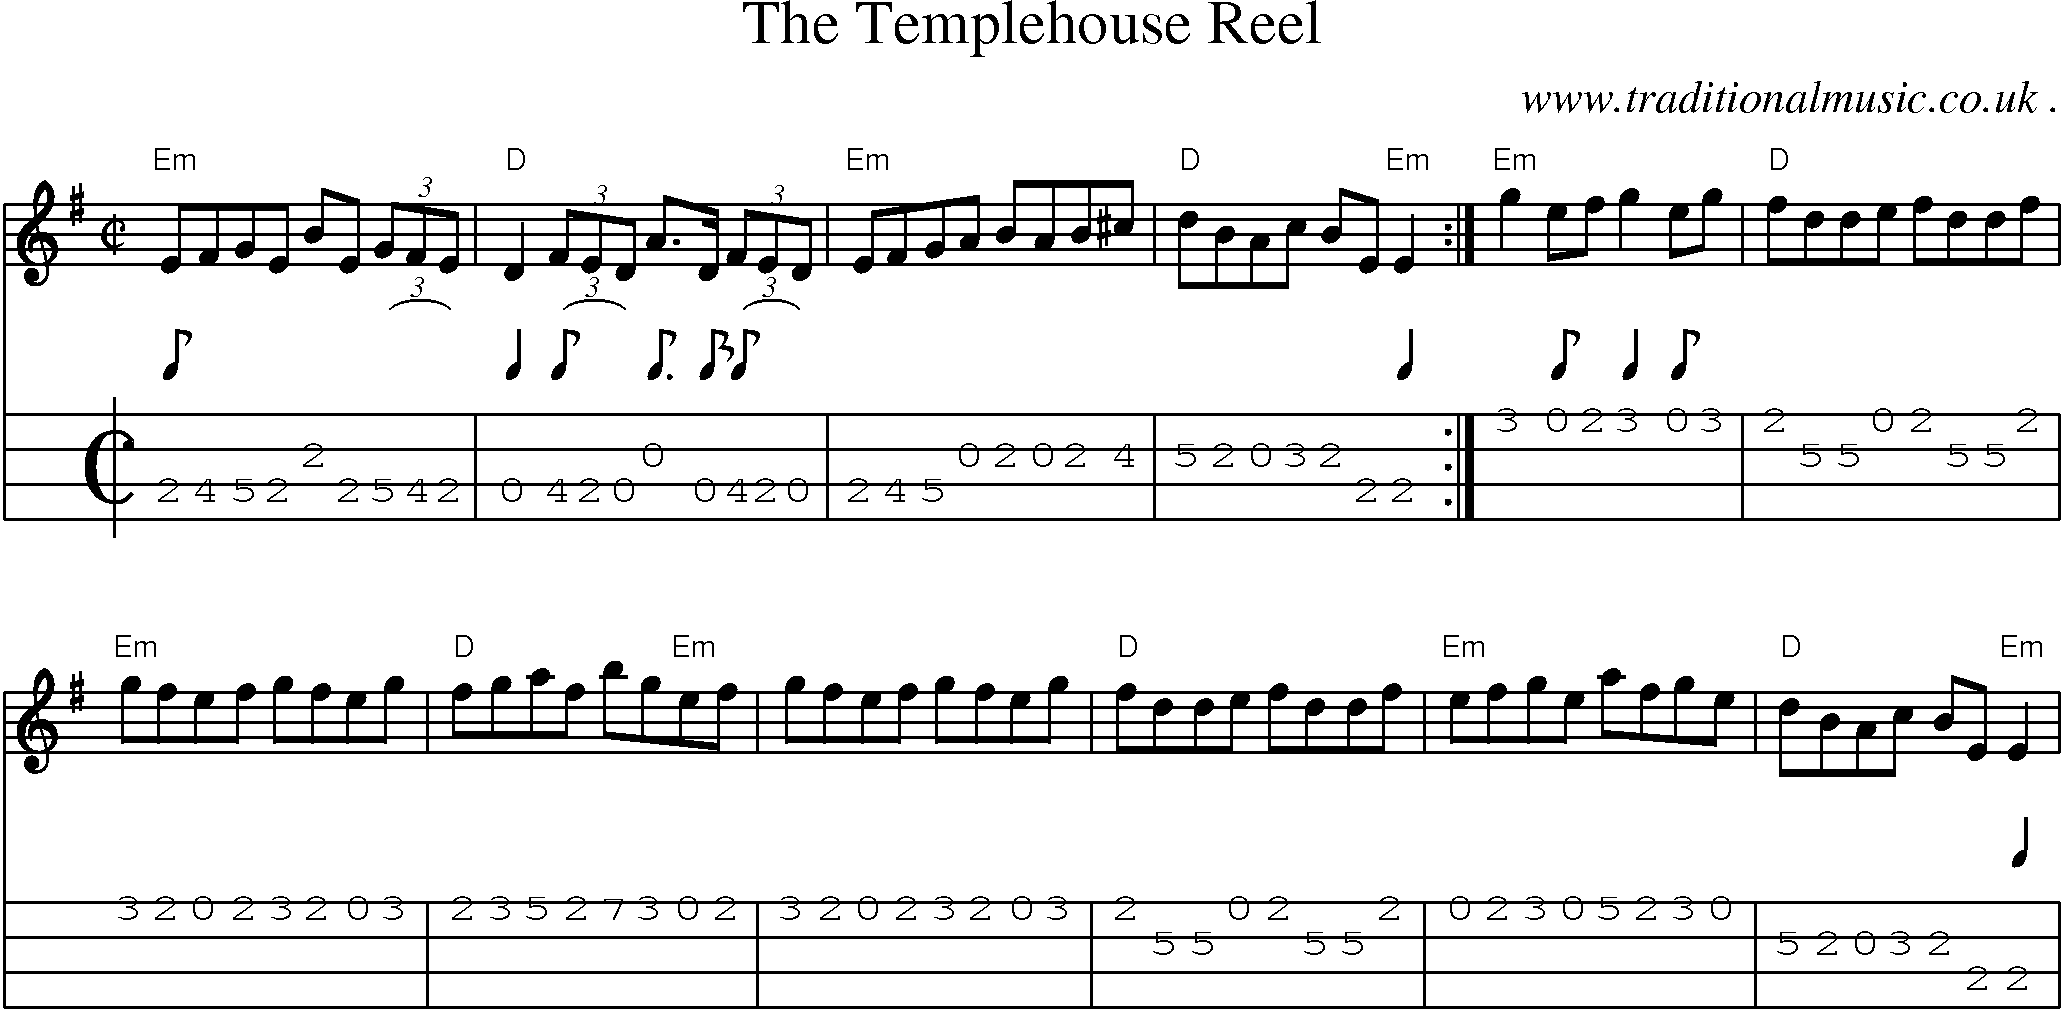 Music Score and Guitar Tabs for The Templehouse Reel